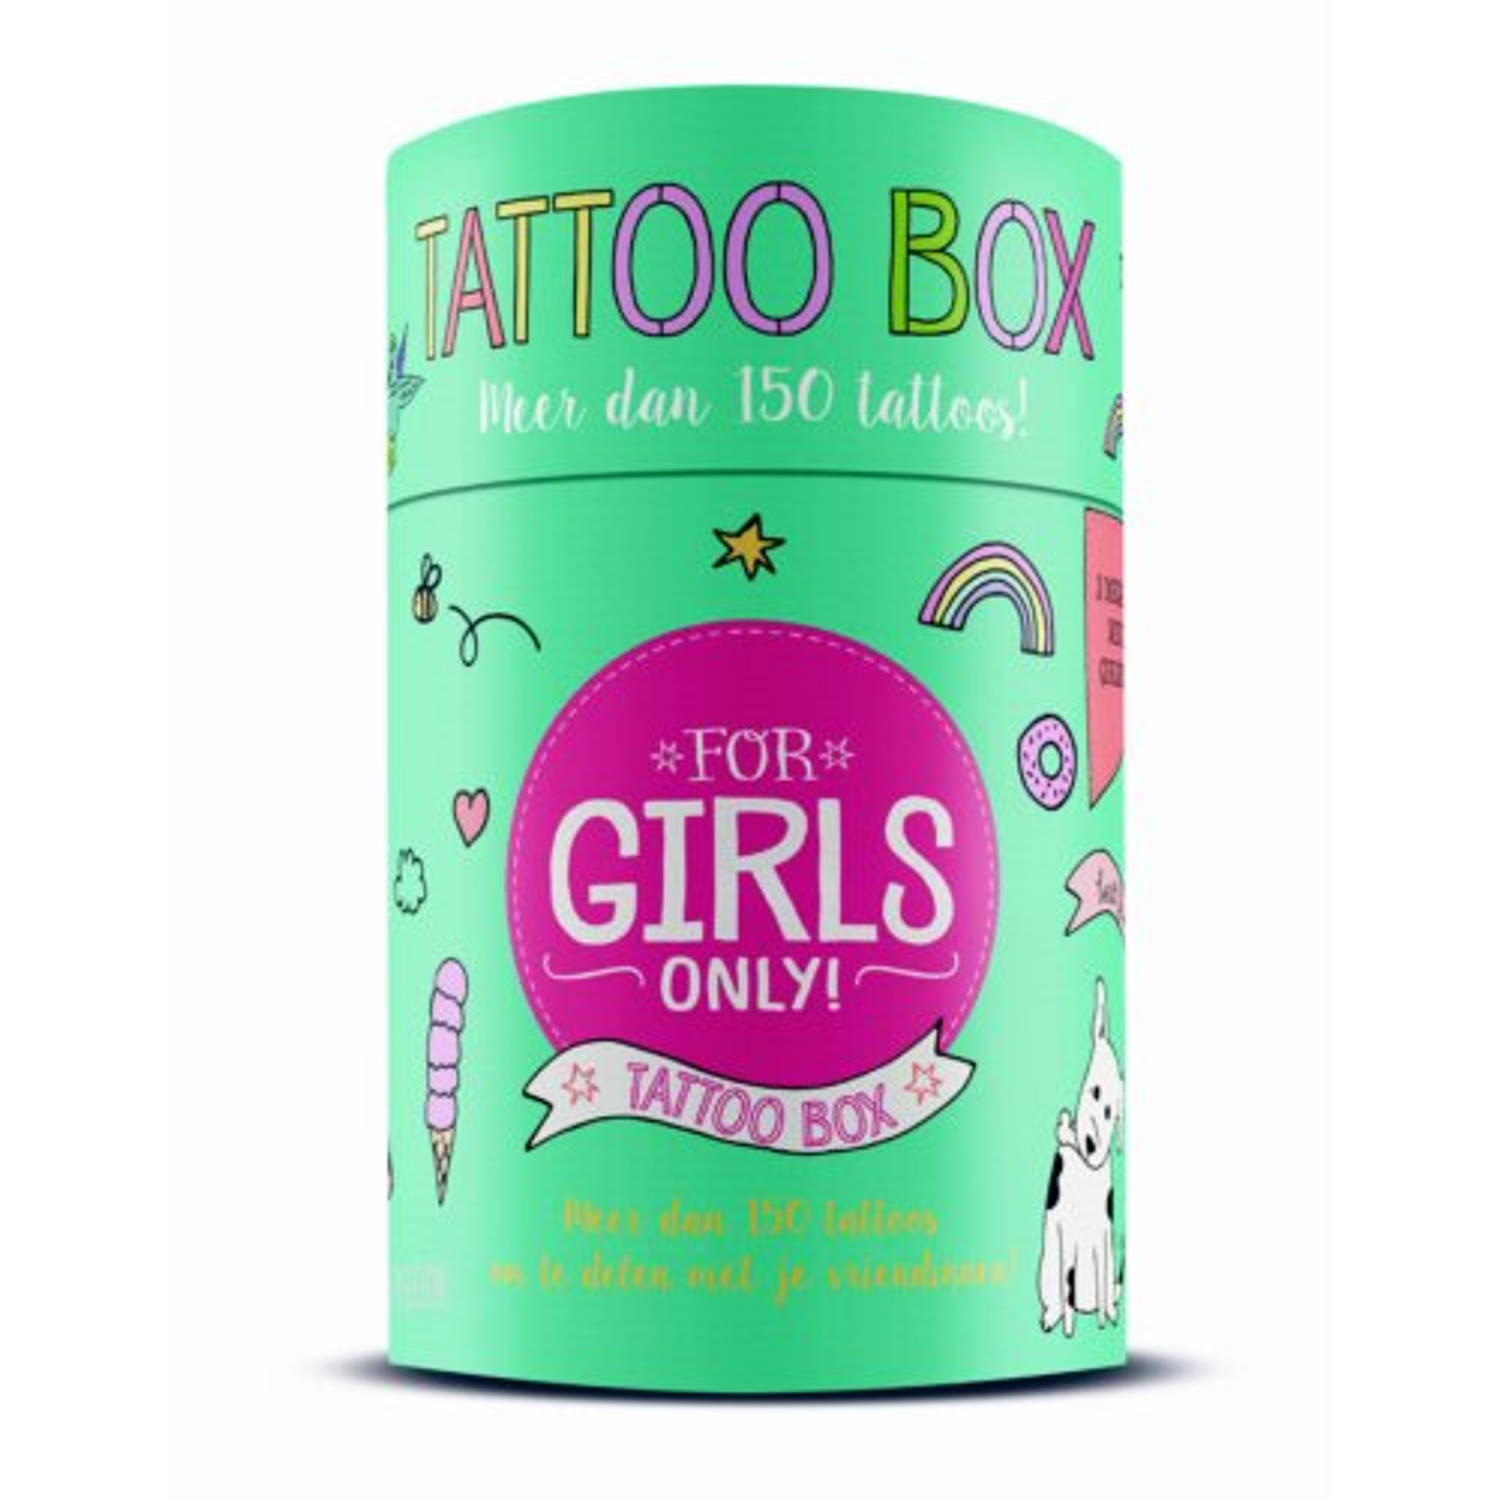 Tattoo Box - For Girls Only!